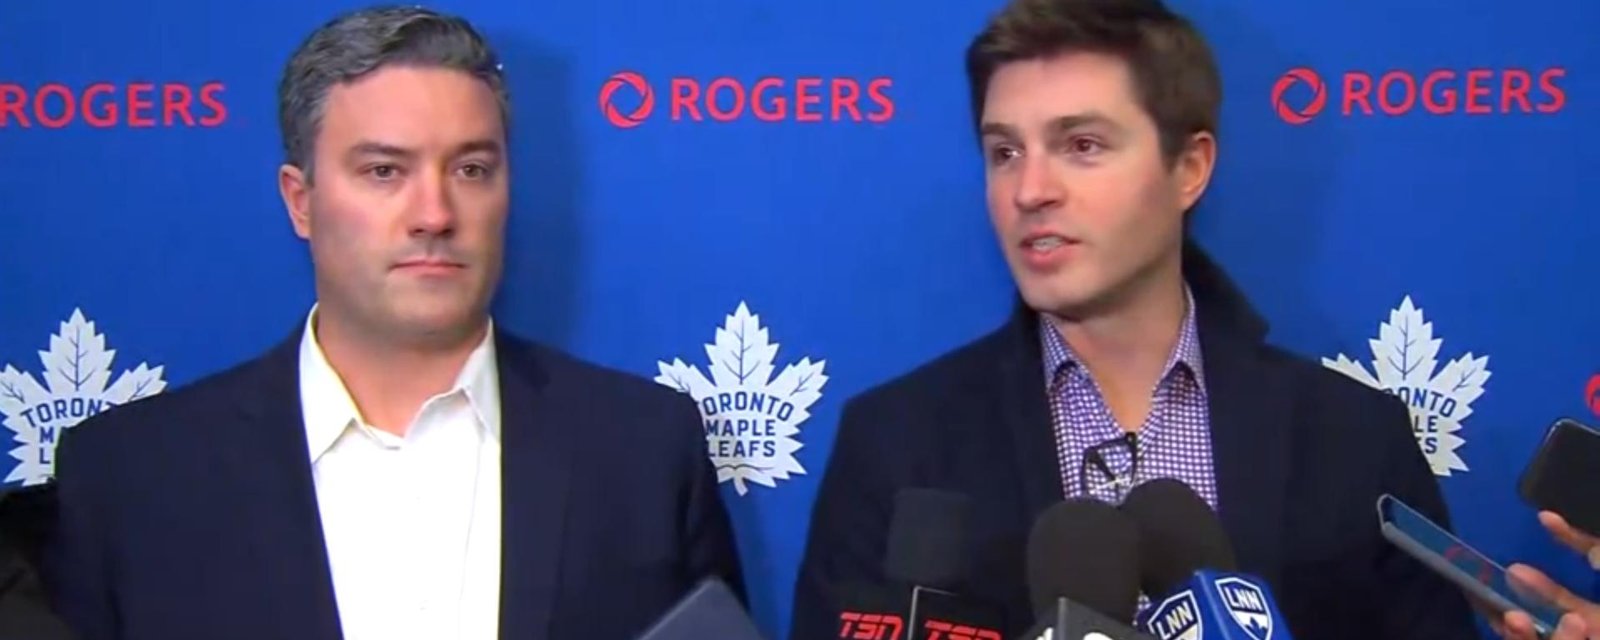 Greg Moore’s employer rallied for him to get coaching position with the Marlies